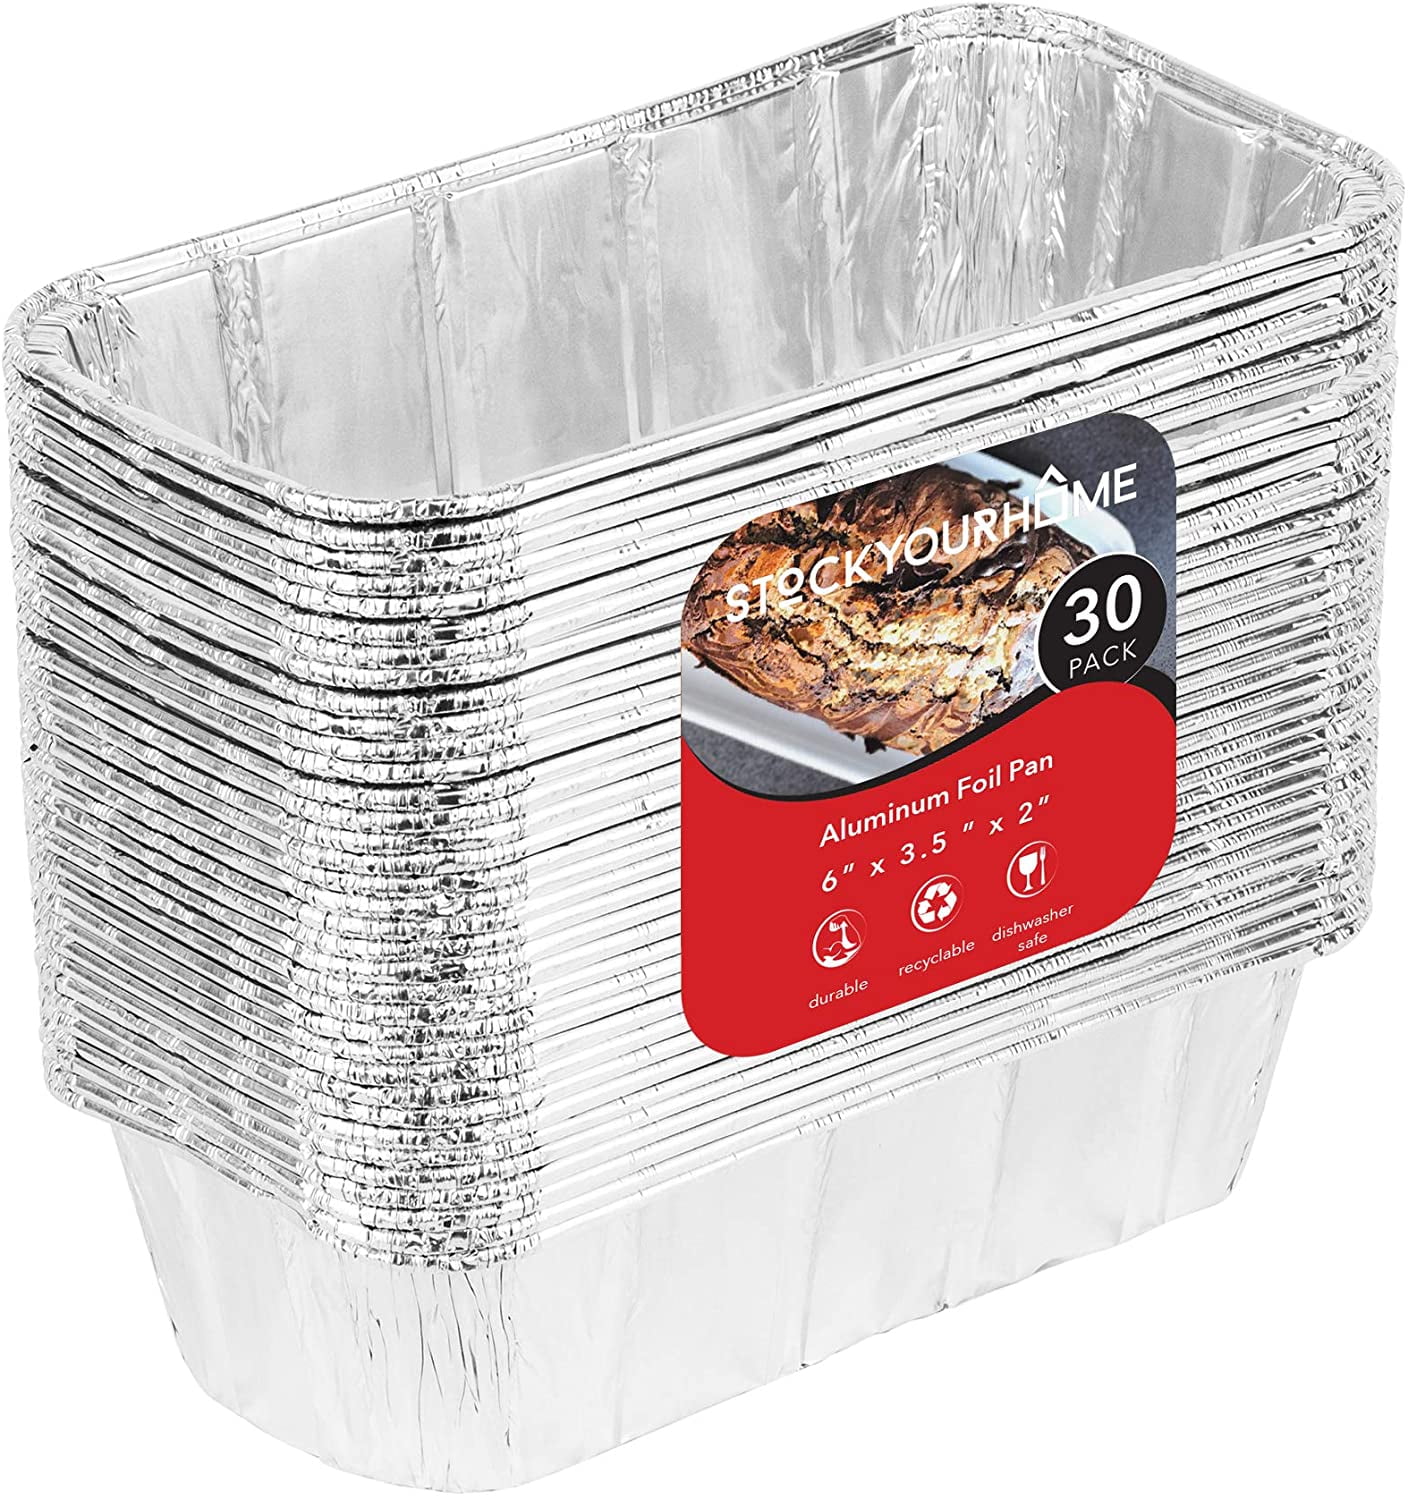 20 Count Stock Your Home 8x8 Aluminum Pans with Lids 